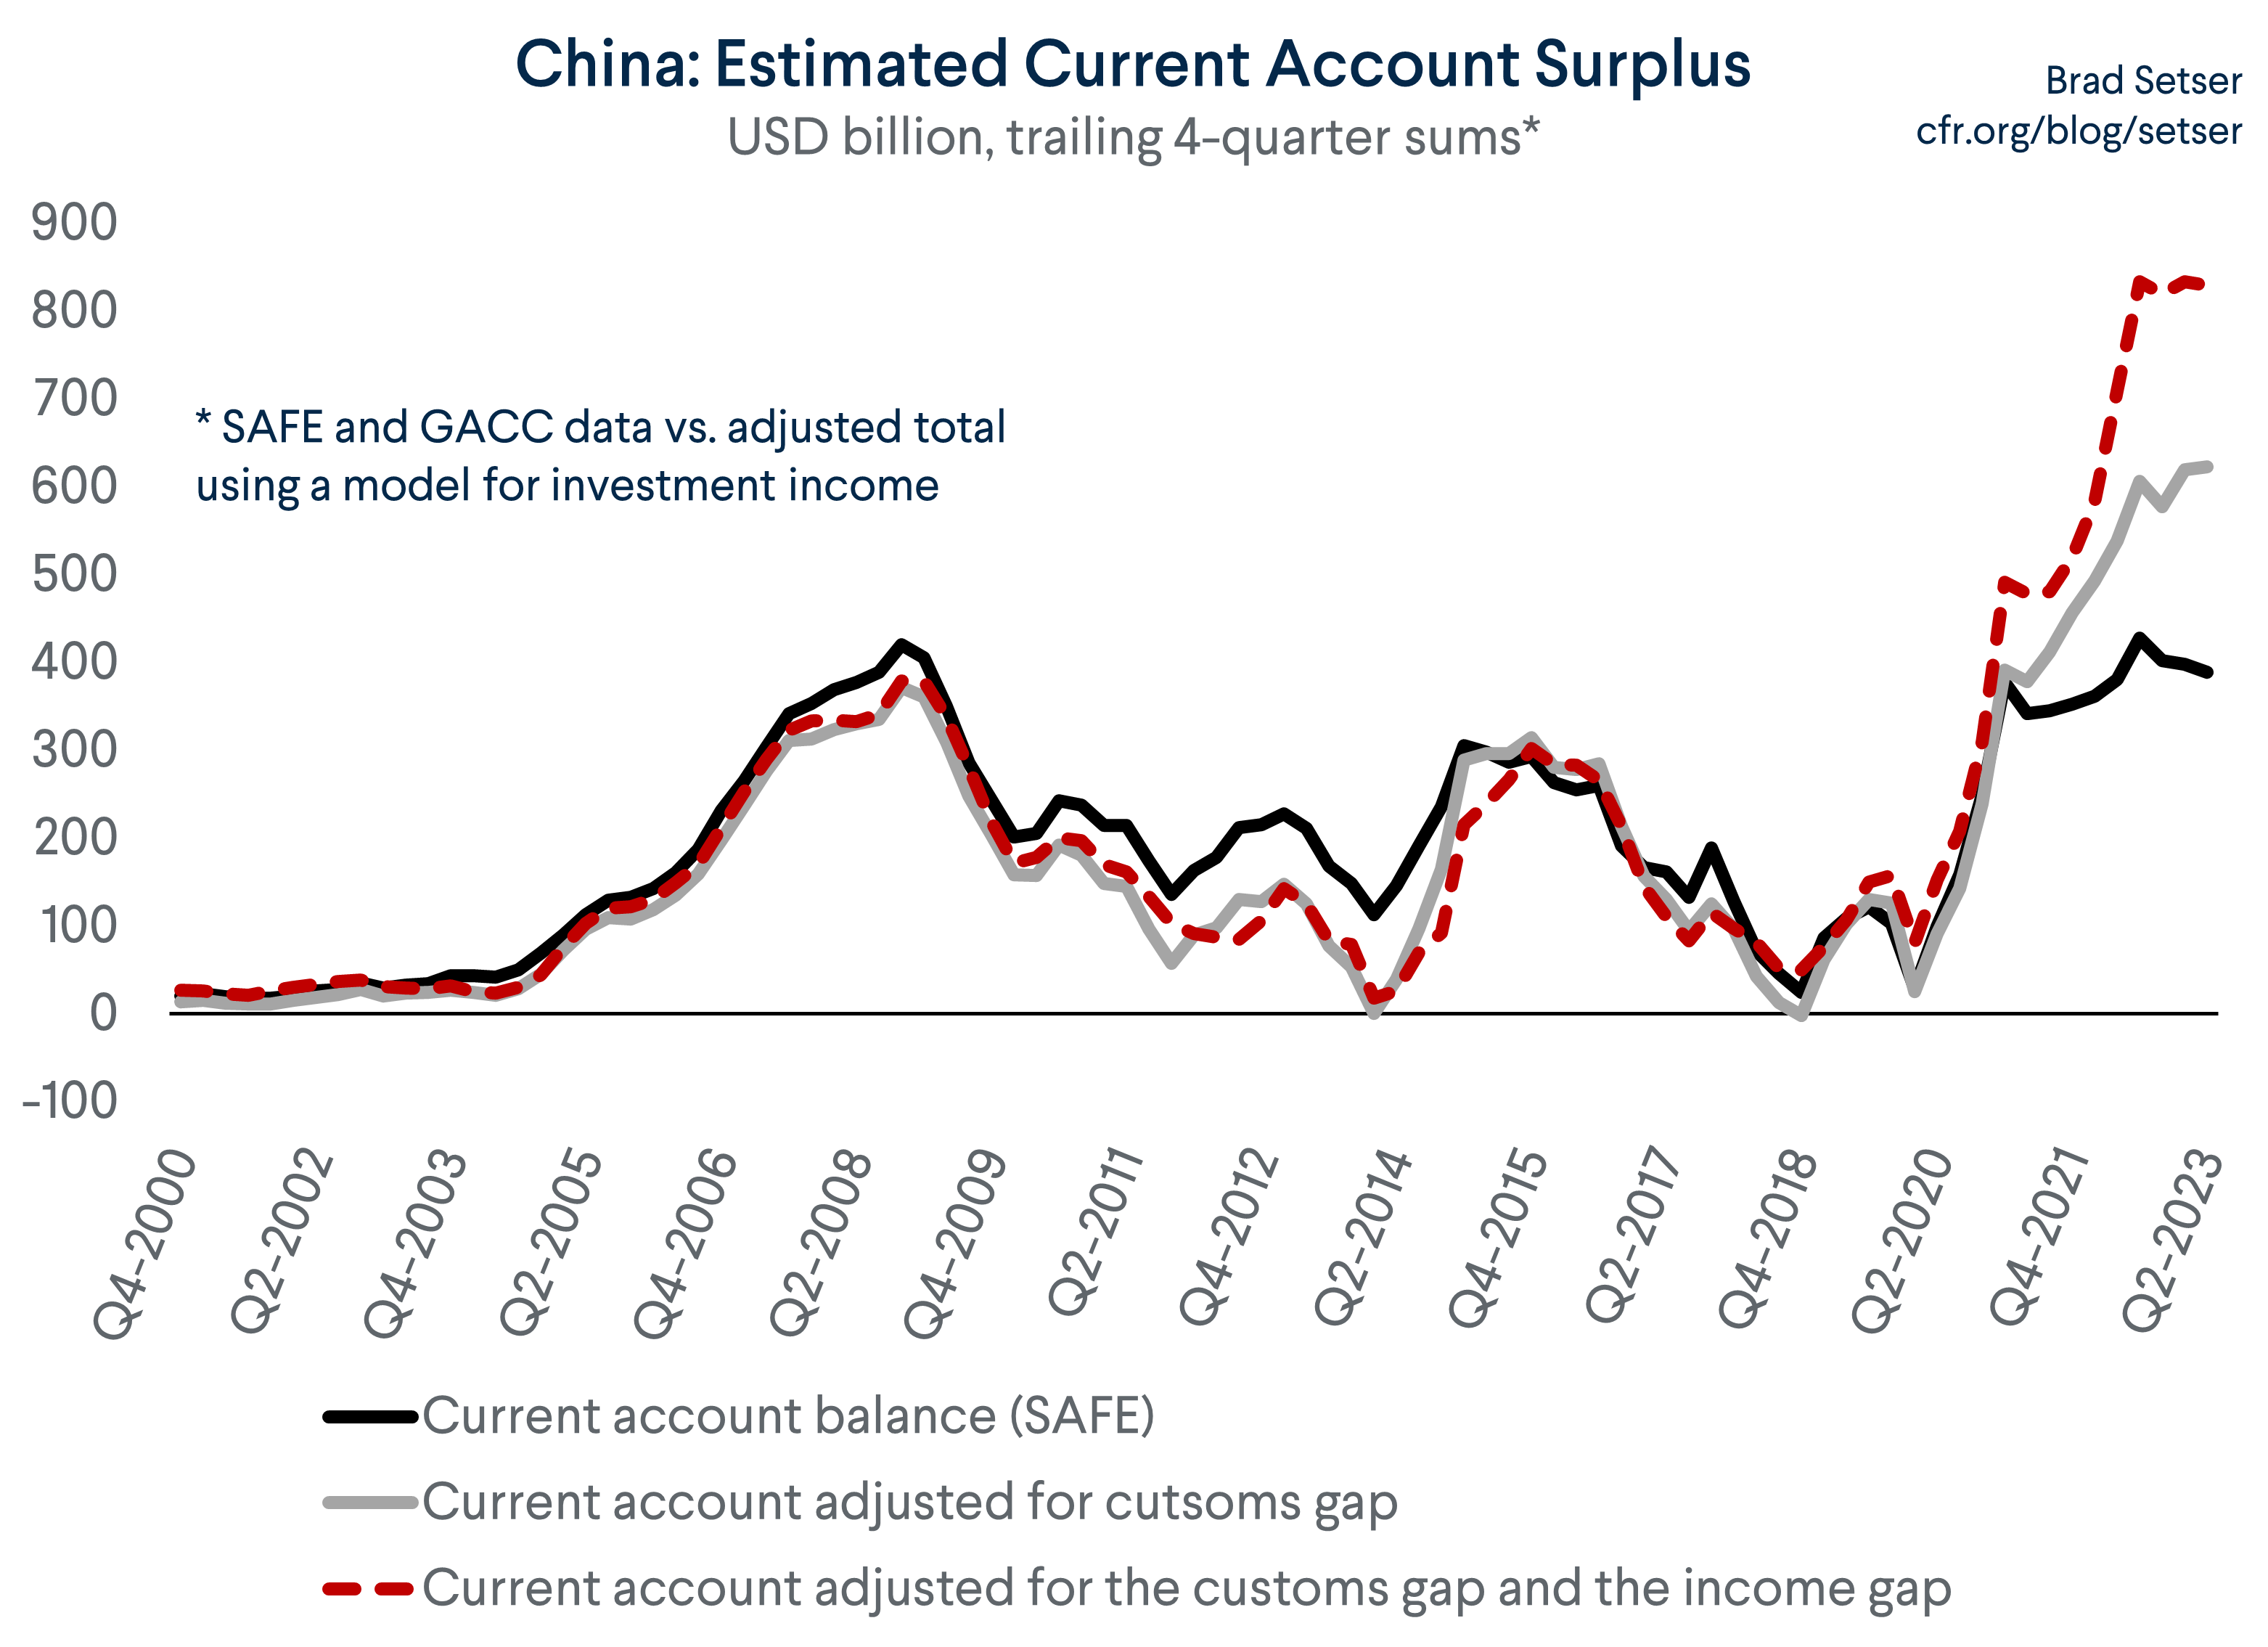 China's Current Account Surplus Is Likely Much Bigger Than Reported